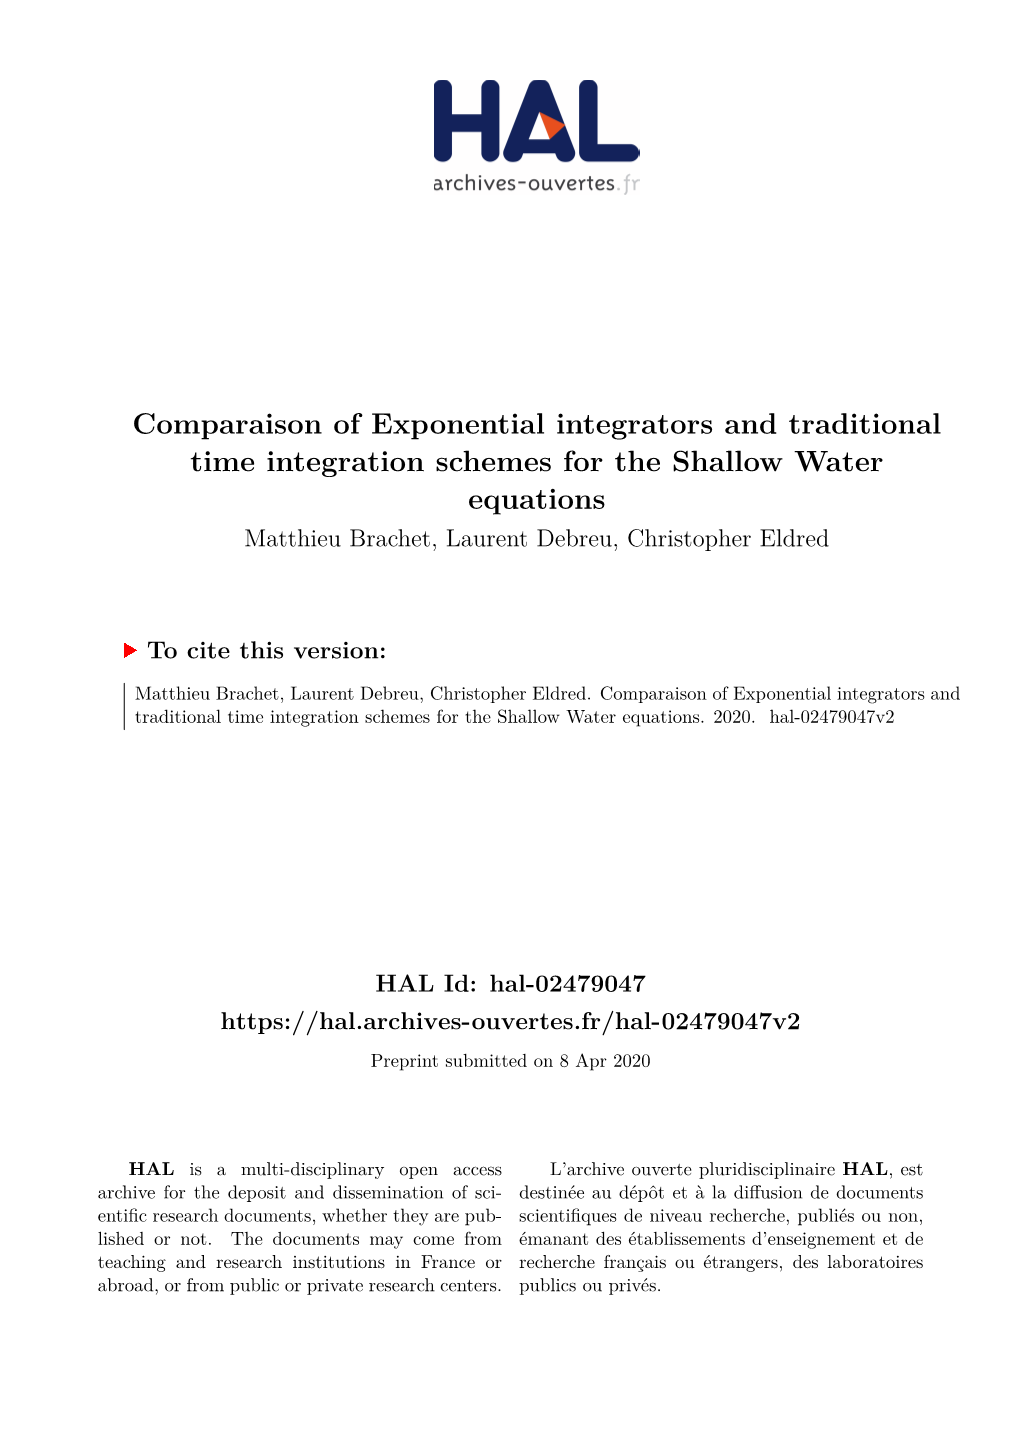 Comparaison of Exponential Integrators and Traditional Time Integration Schemes for the Shallow Water Equations Matthieu Brachet, Laurent Debreu, Christopher Eldred